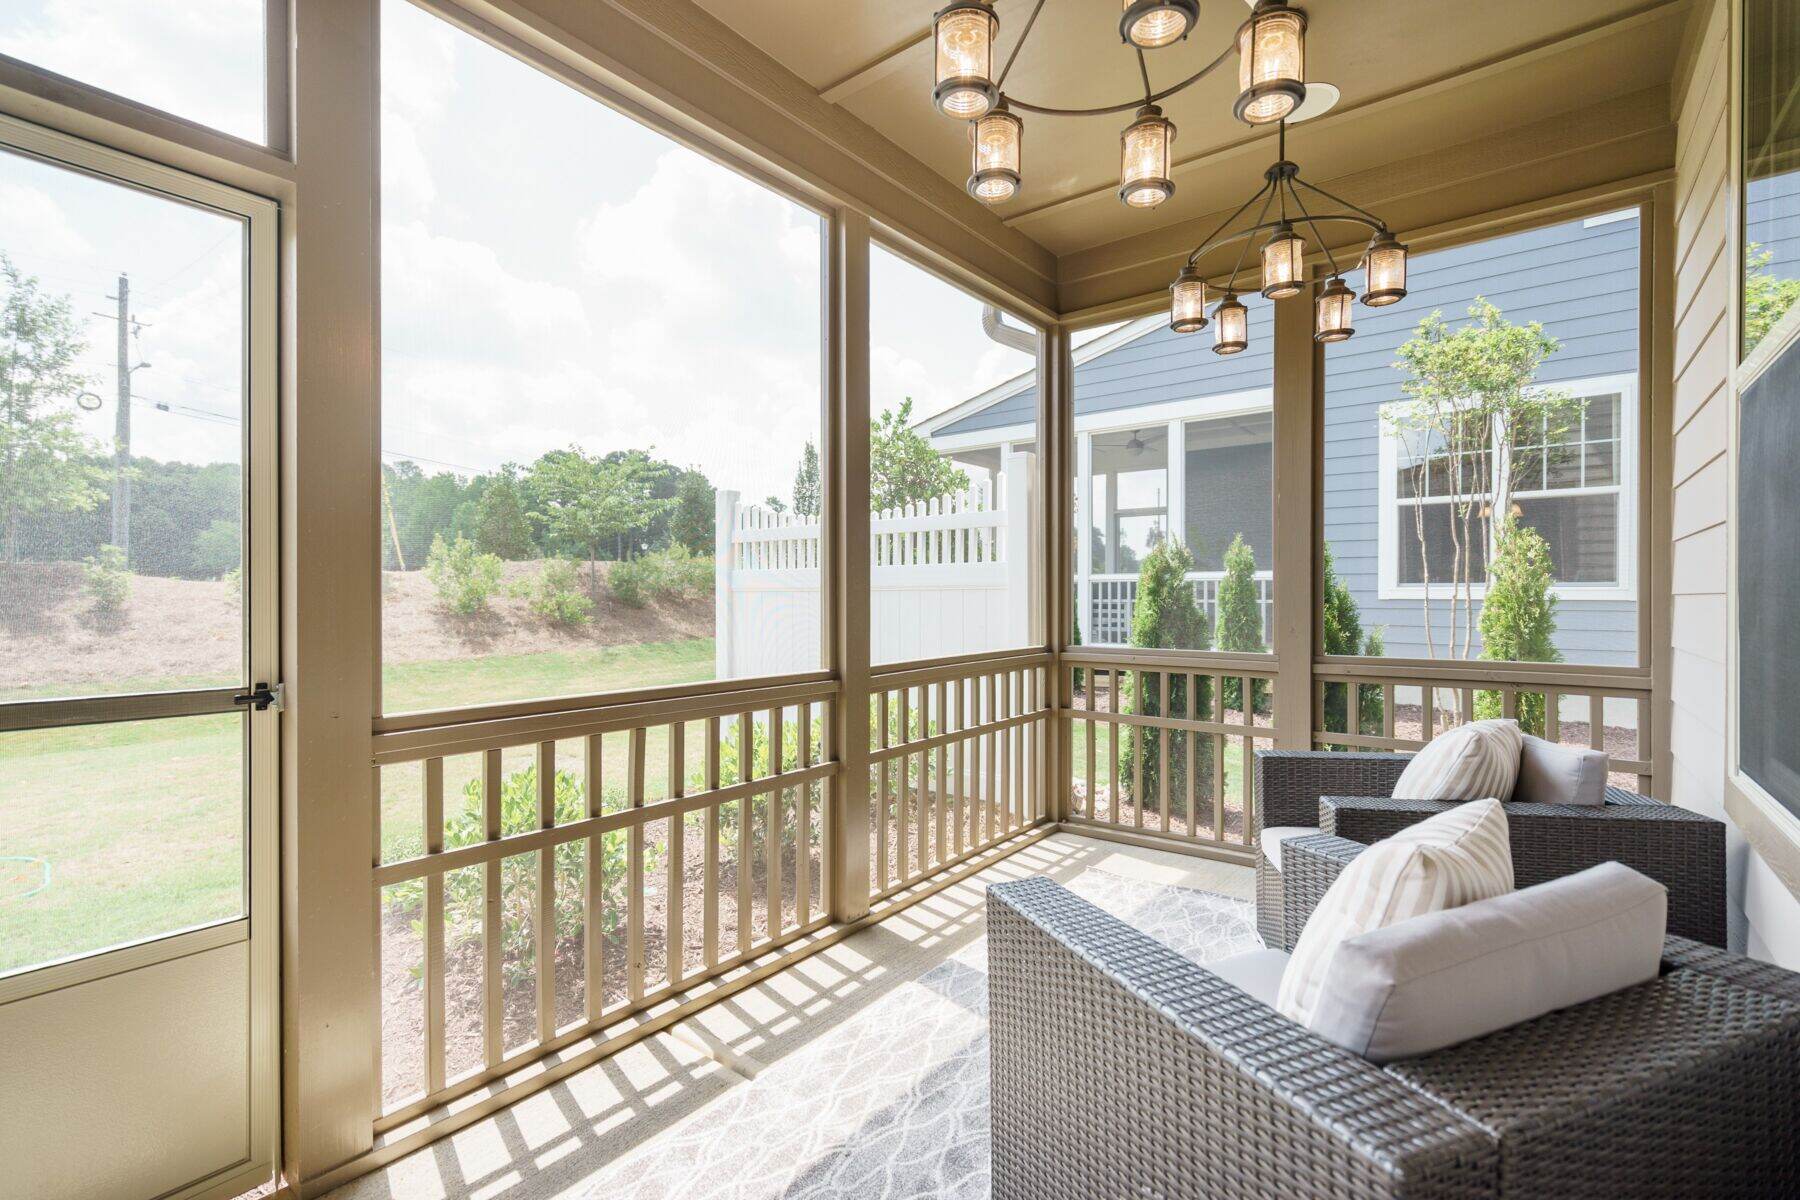 How To Winterize A Screened-In Porch